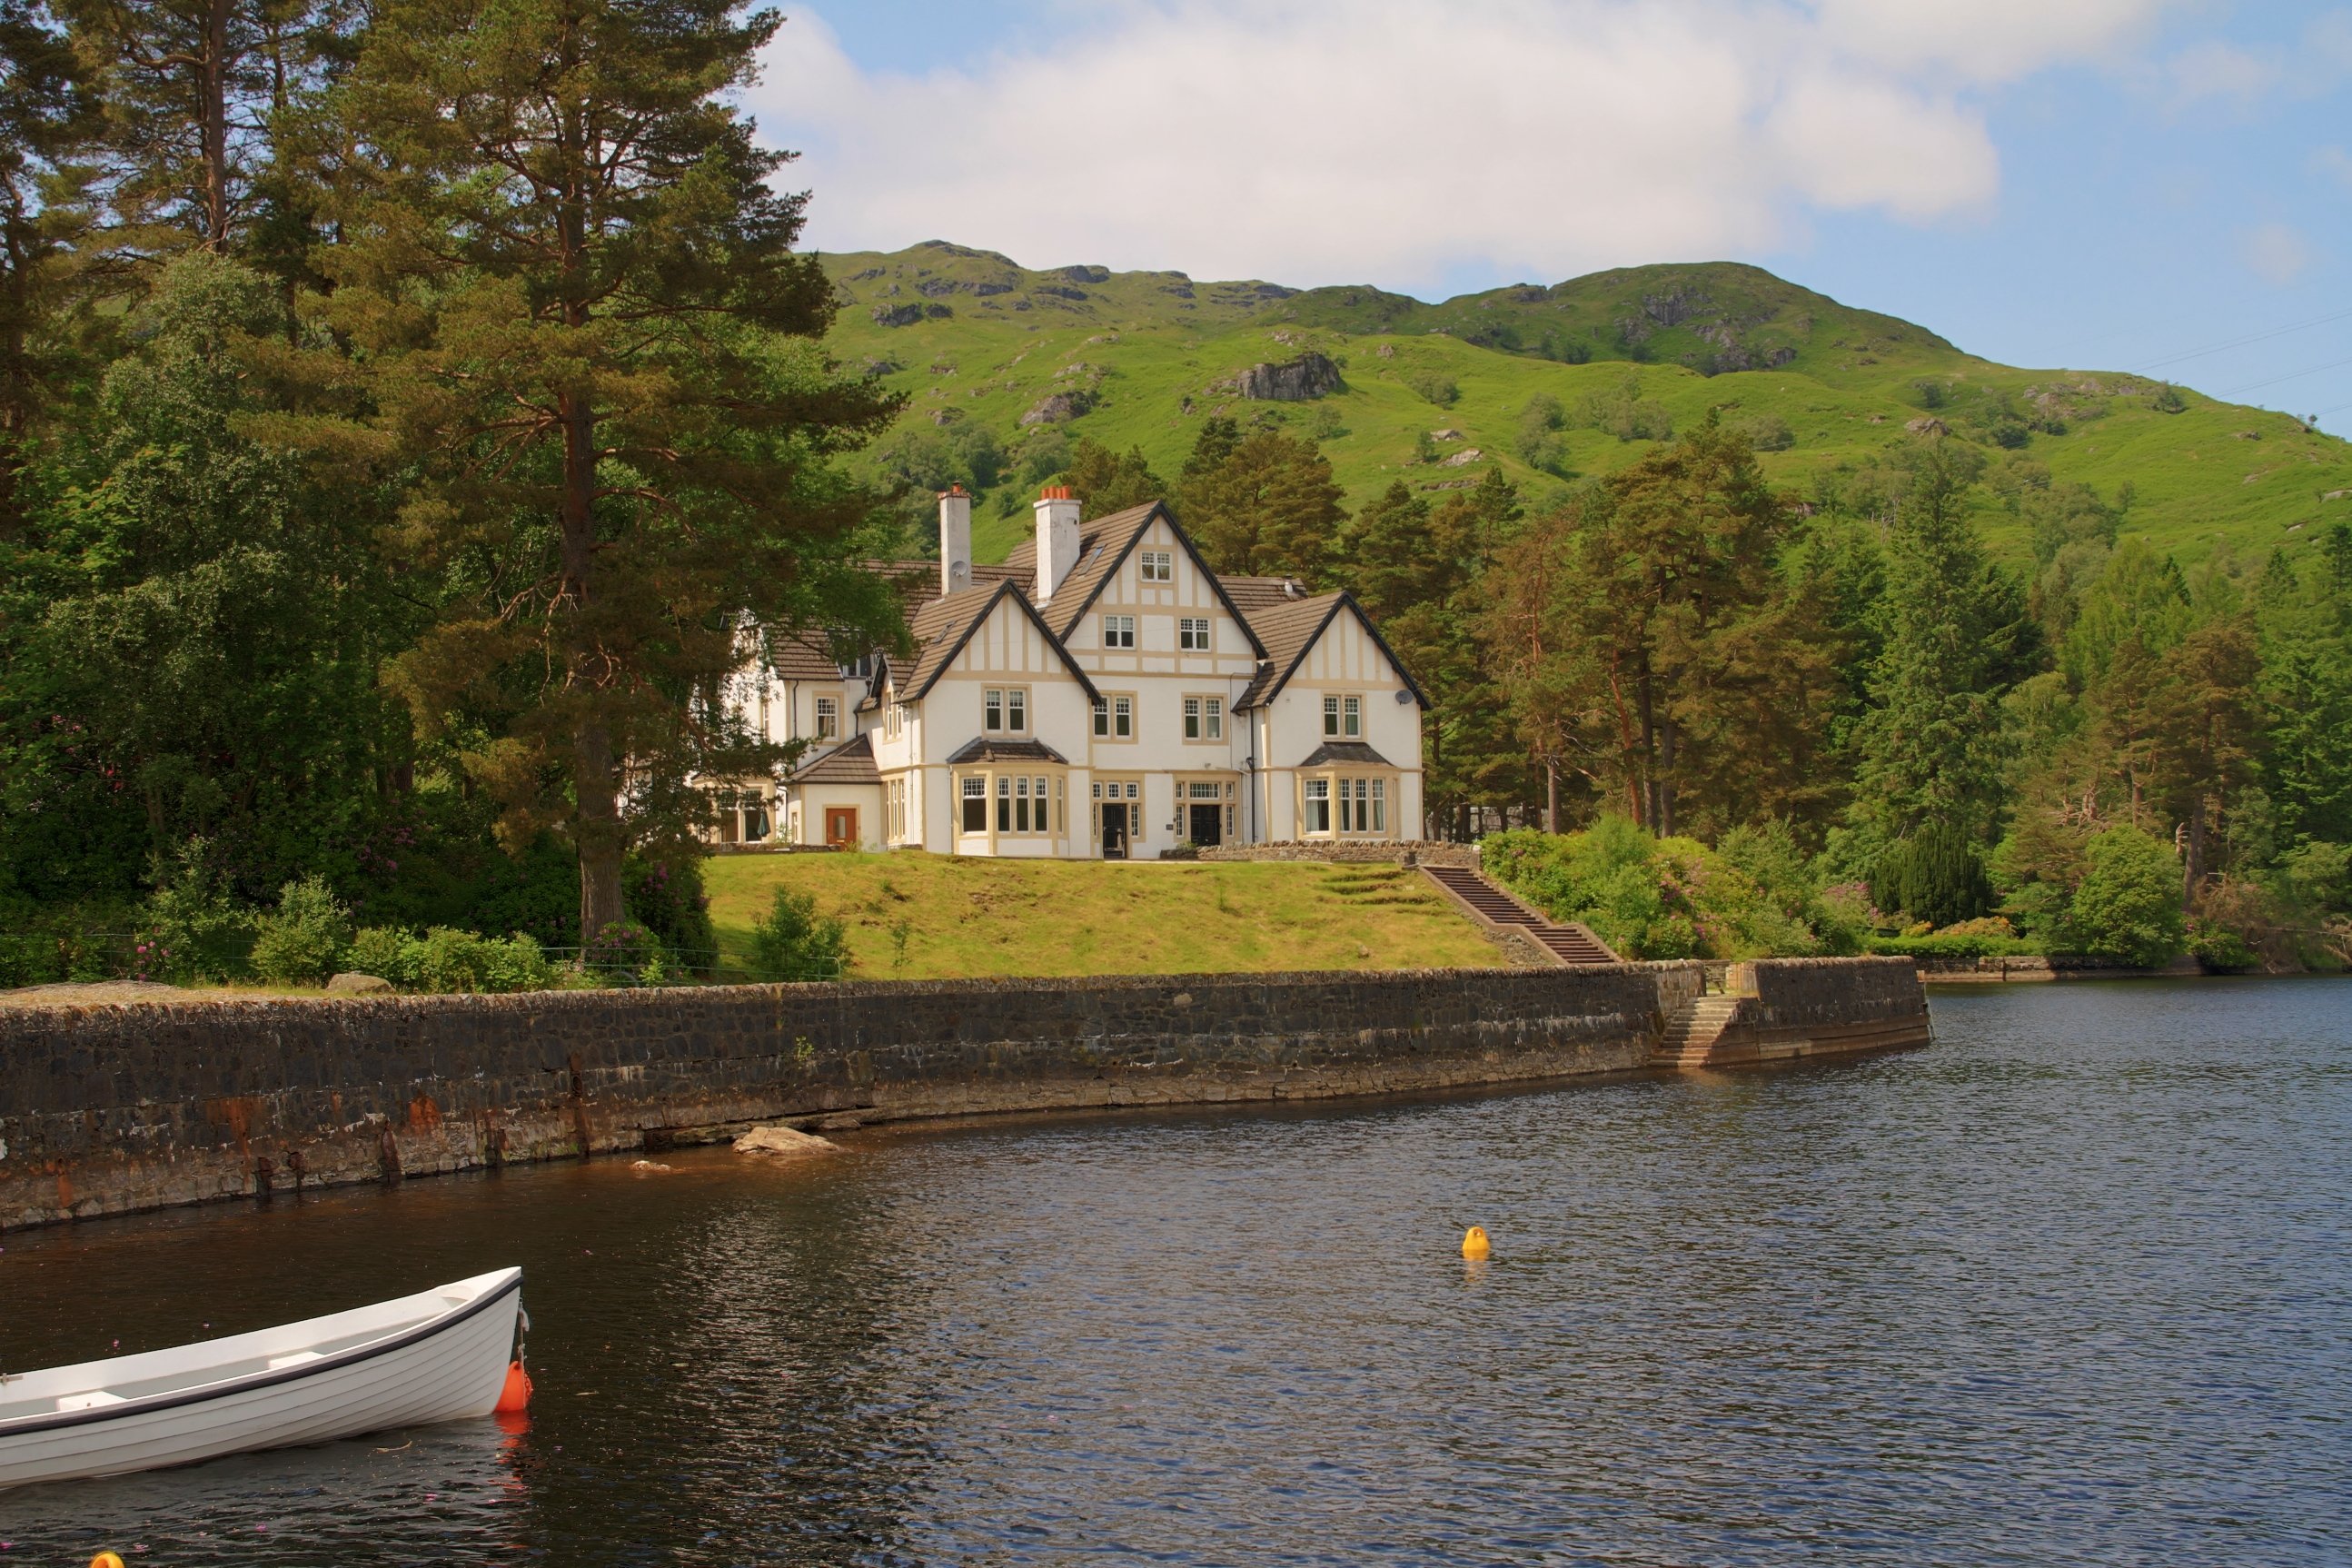 Stronachlachar Lodge - the view of the house from the loch